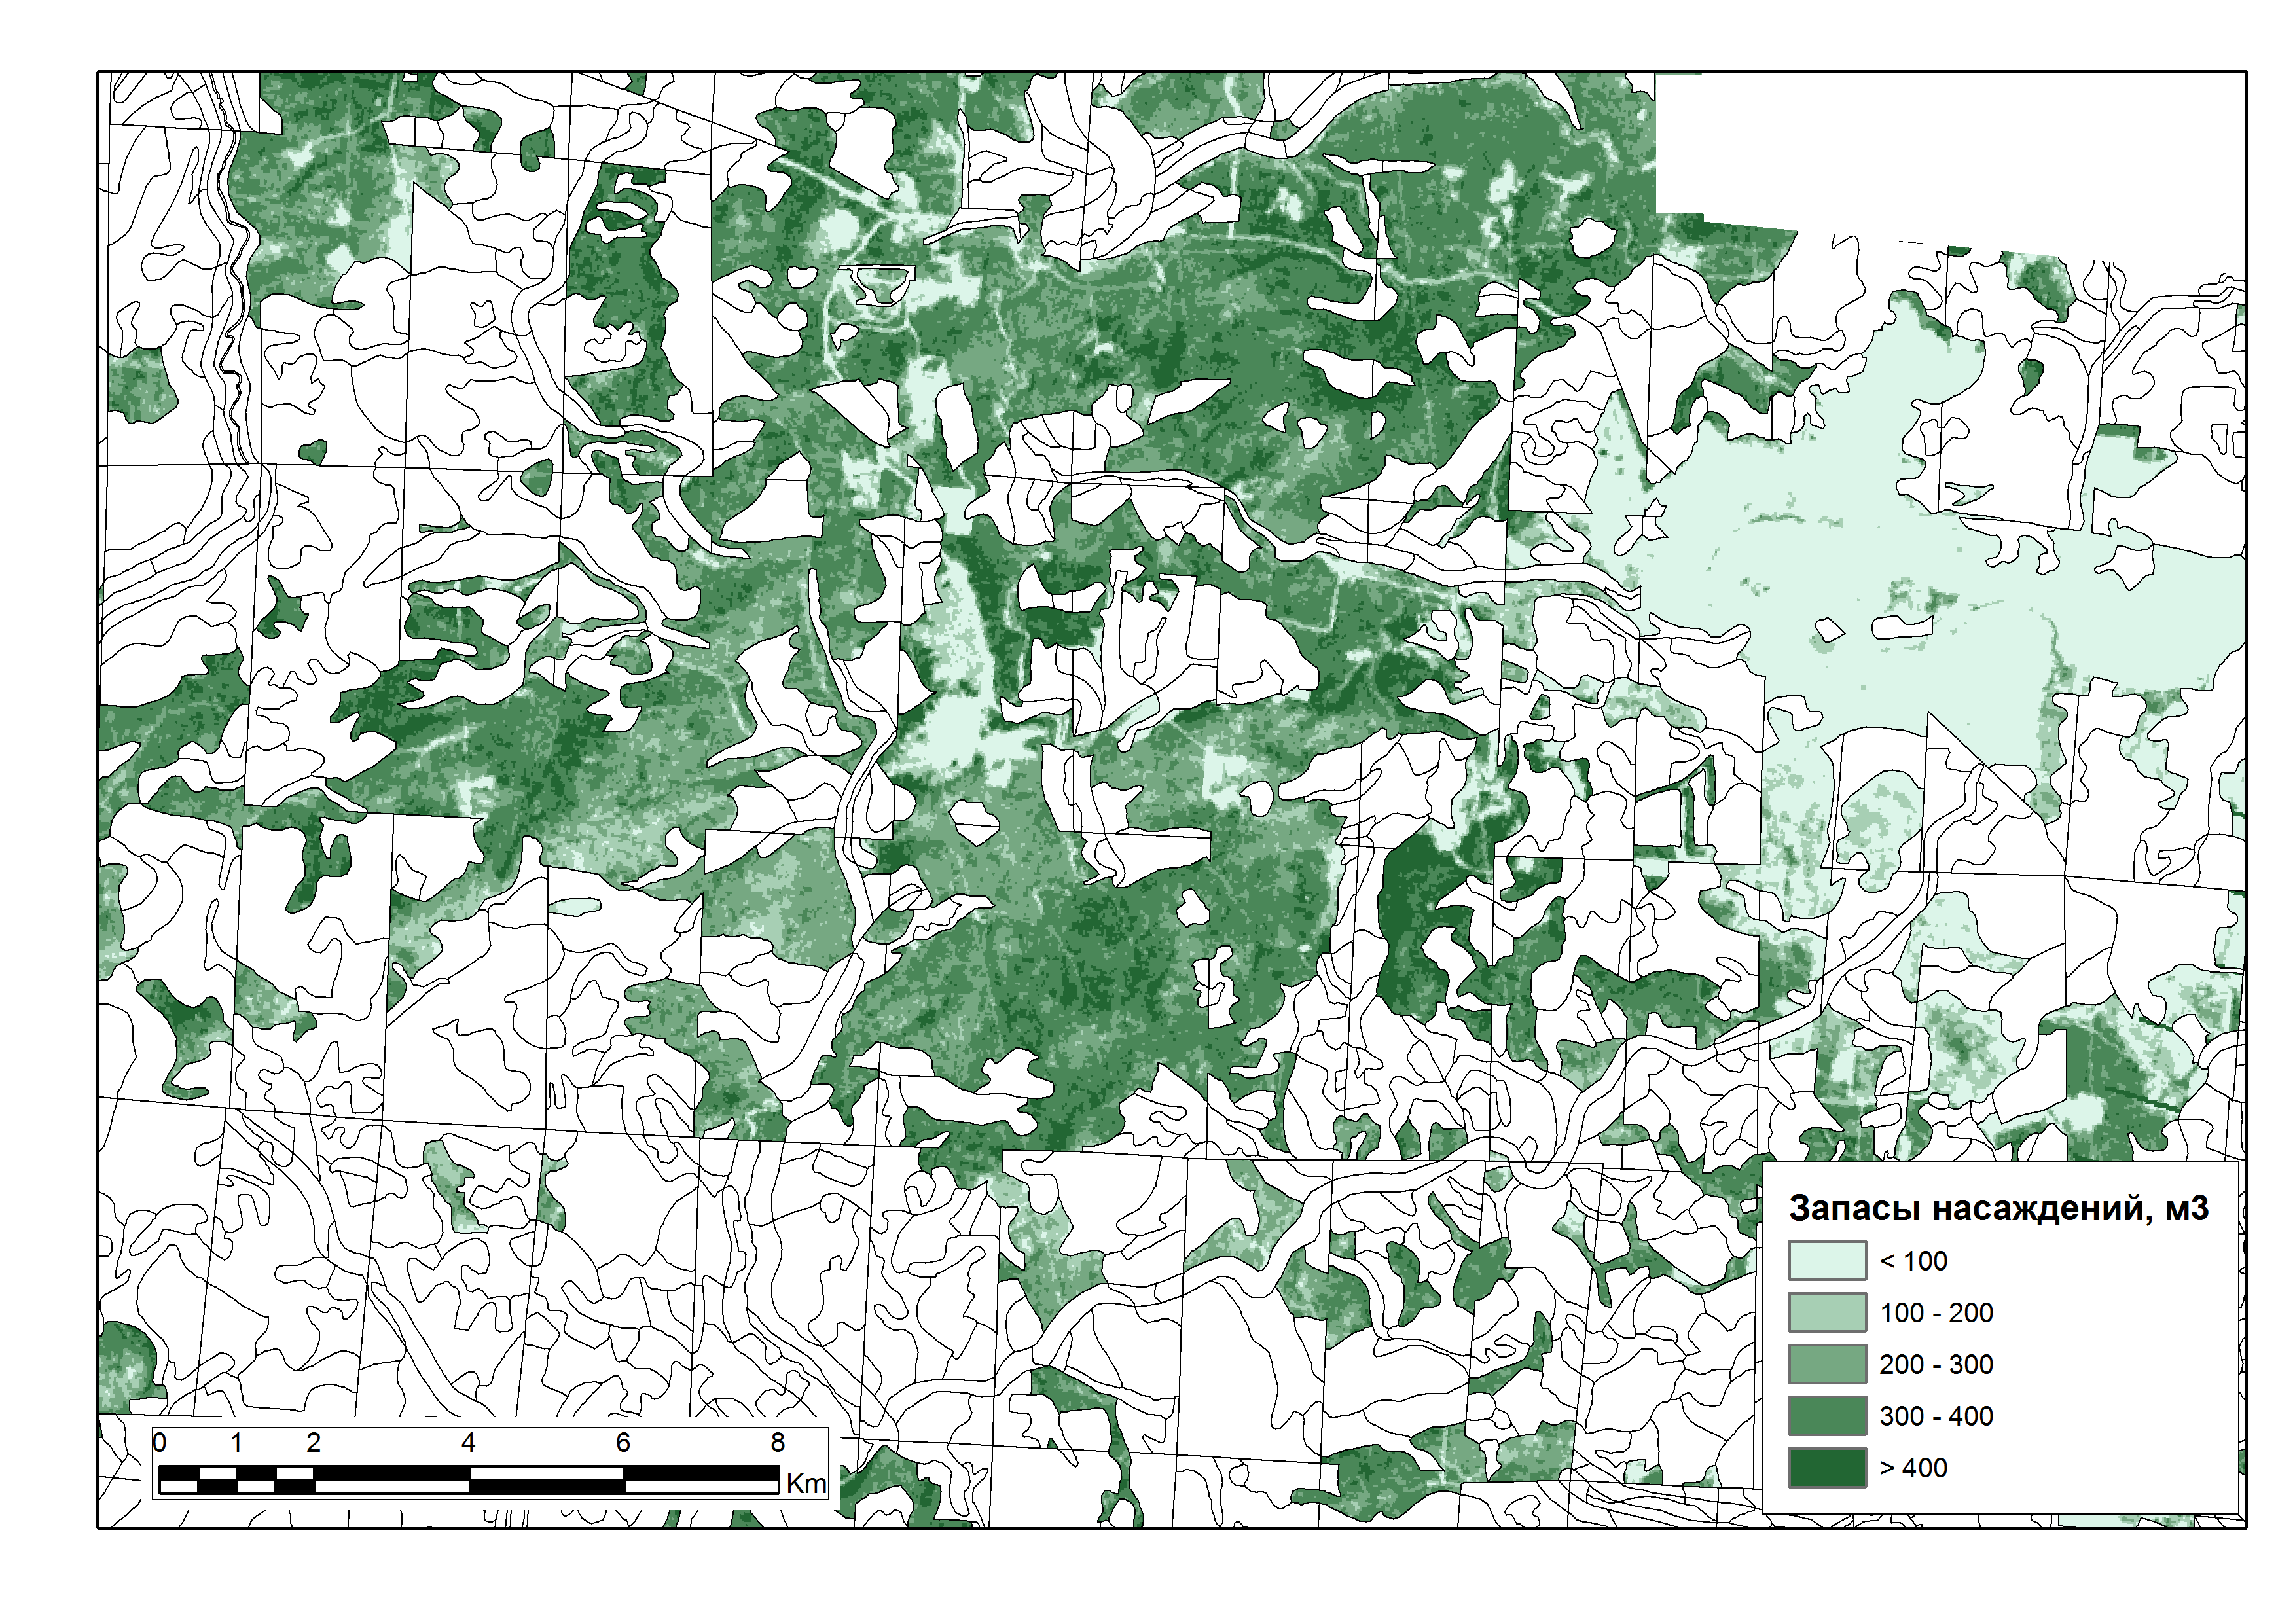 Estimation of forest taxation characteristics using satellite and ground data approach